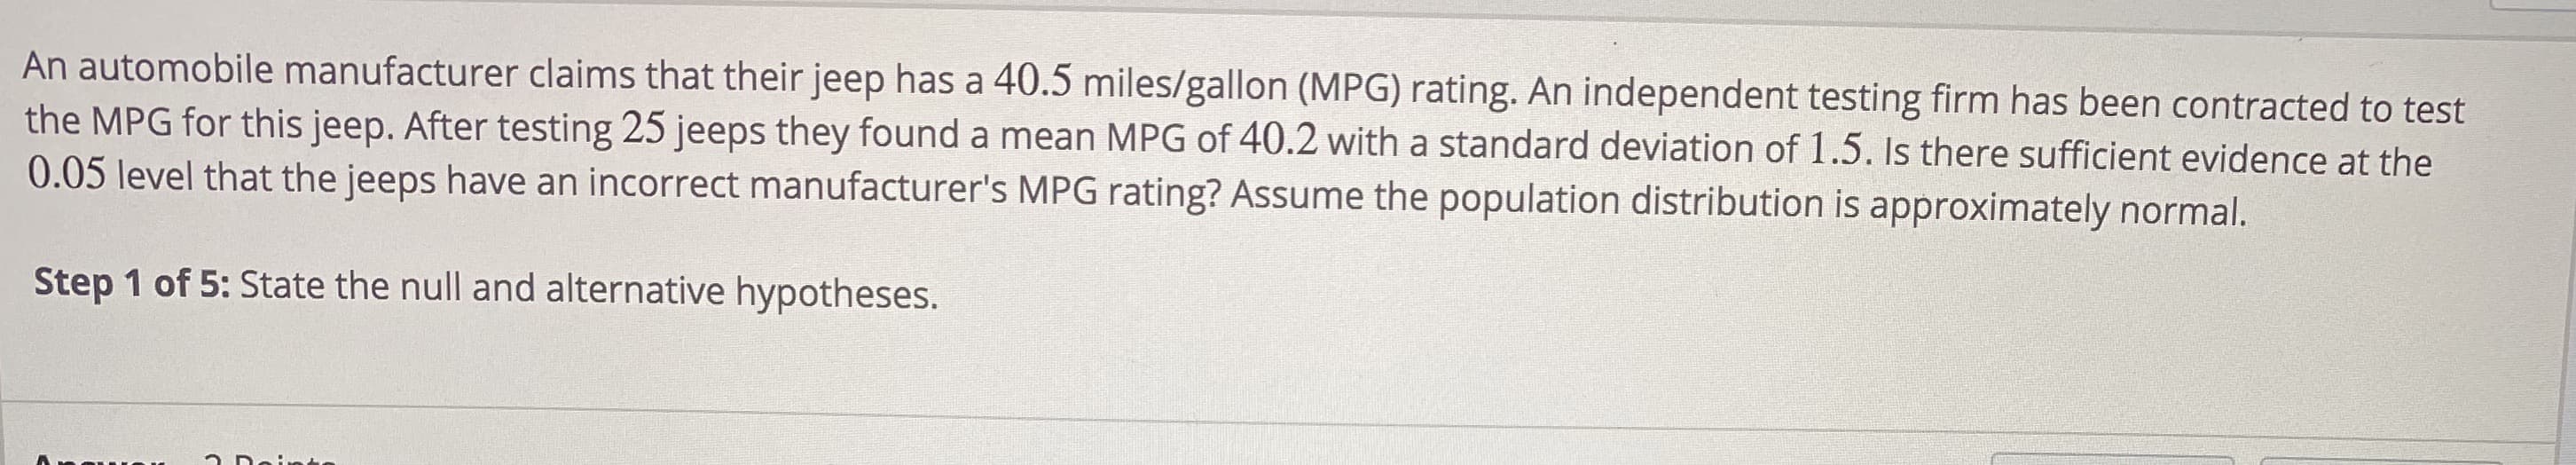 An automobile manufacturer claims that their jeep has a 40.5 miles/gallon (MPG) rating. An independent testing firm has been contracted to test
the MPG for this jeep. After testing 25 jeeps they found a mean MPG of 40.2 with a standard deviation of 1.5. Is there sufficient evidence at the
0.05 level that the jeeps have an incorrect manufacturer's MPG rating? Assume the population distribution is approximately normal.
Step 1 of 5: State the null and alternative hypotheses.
